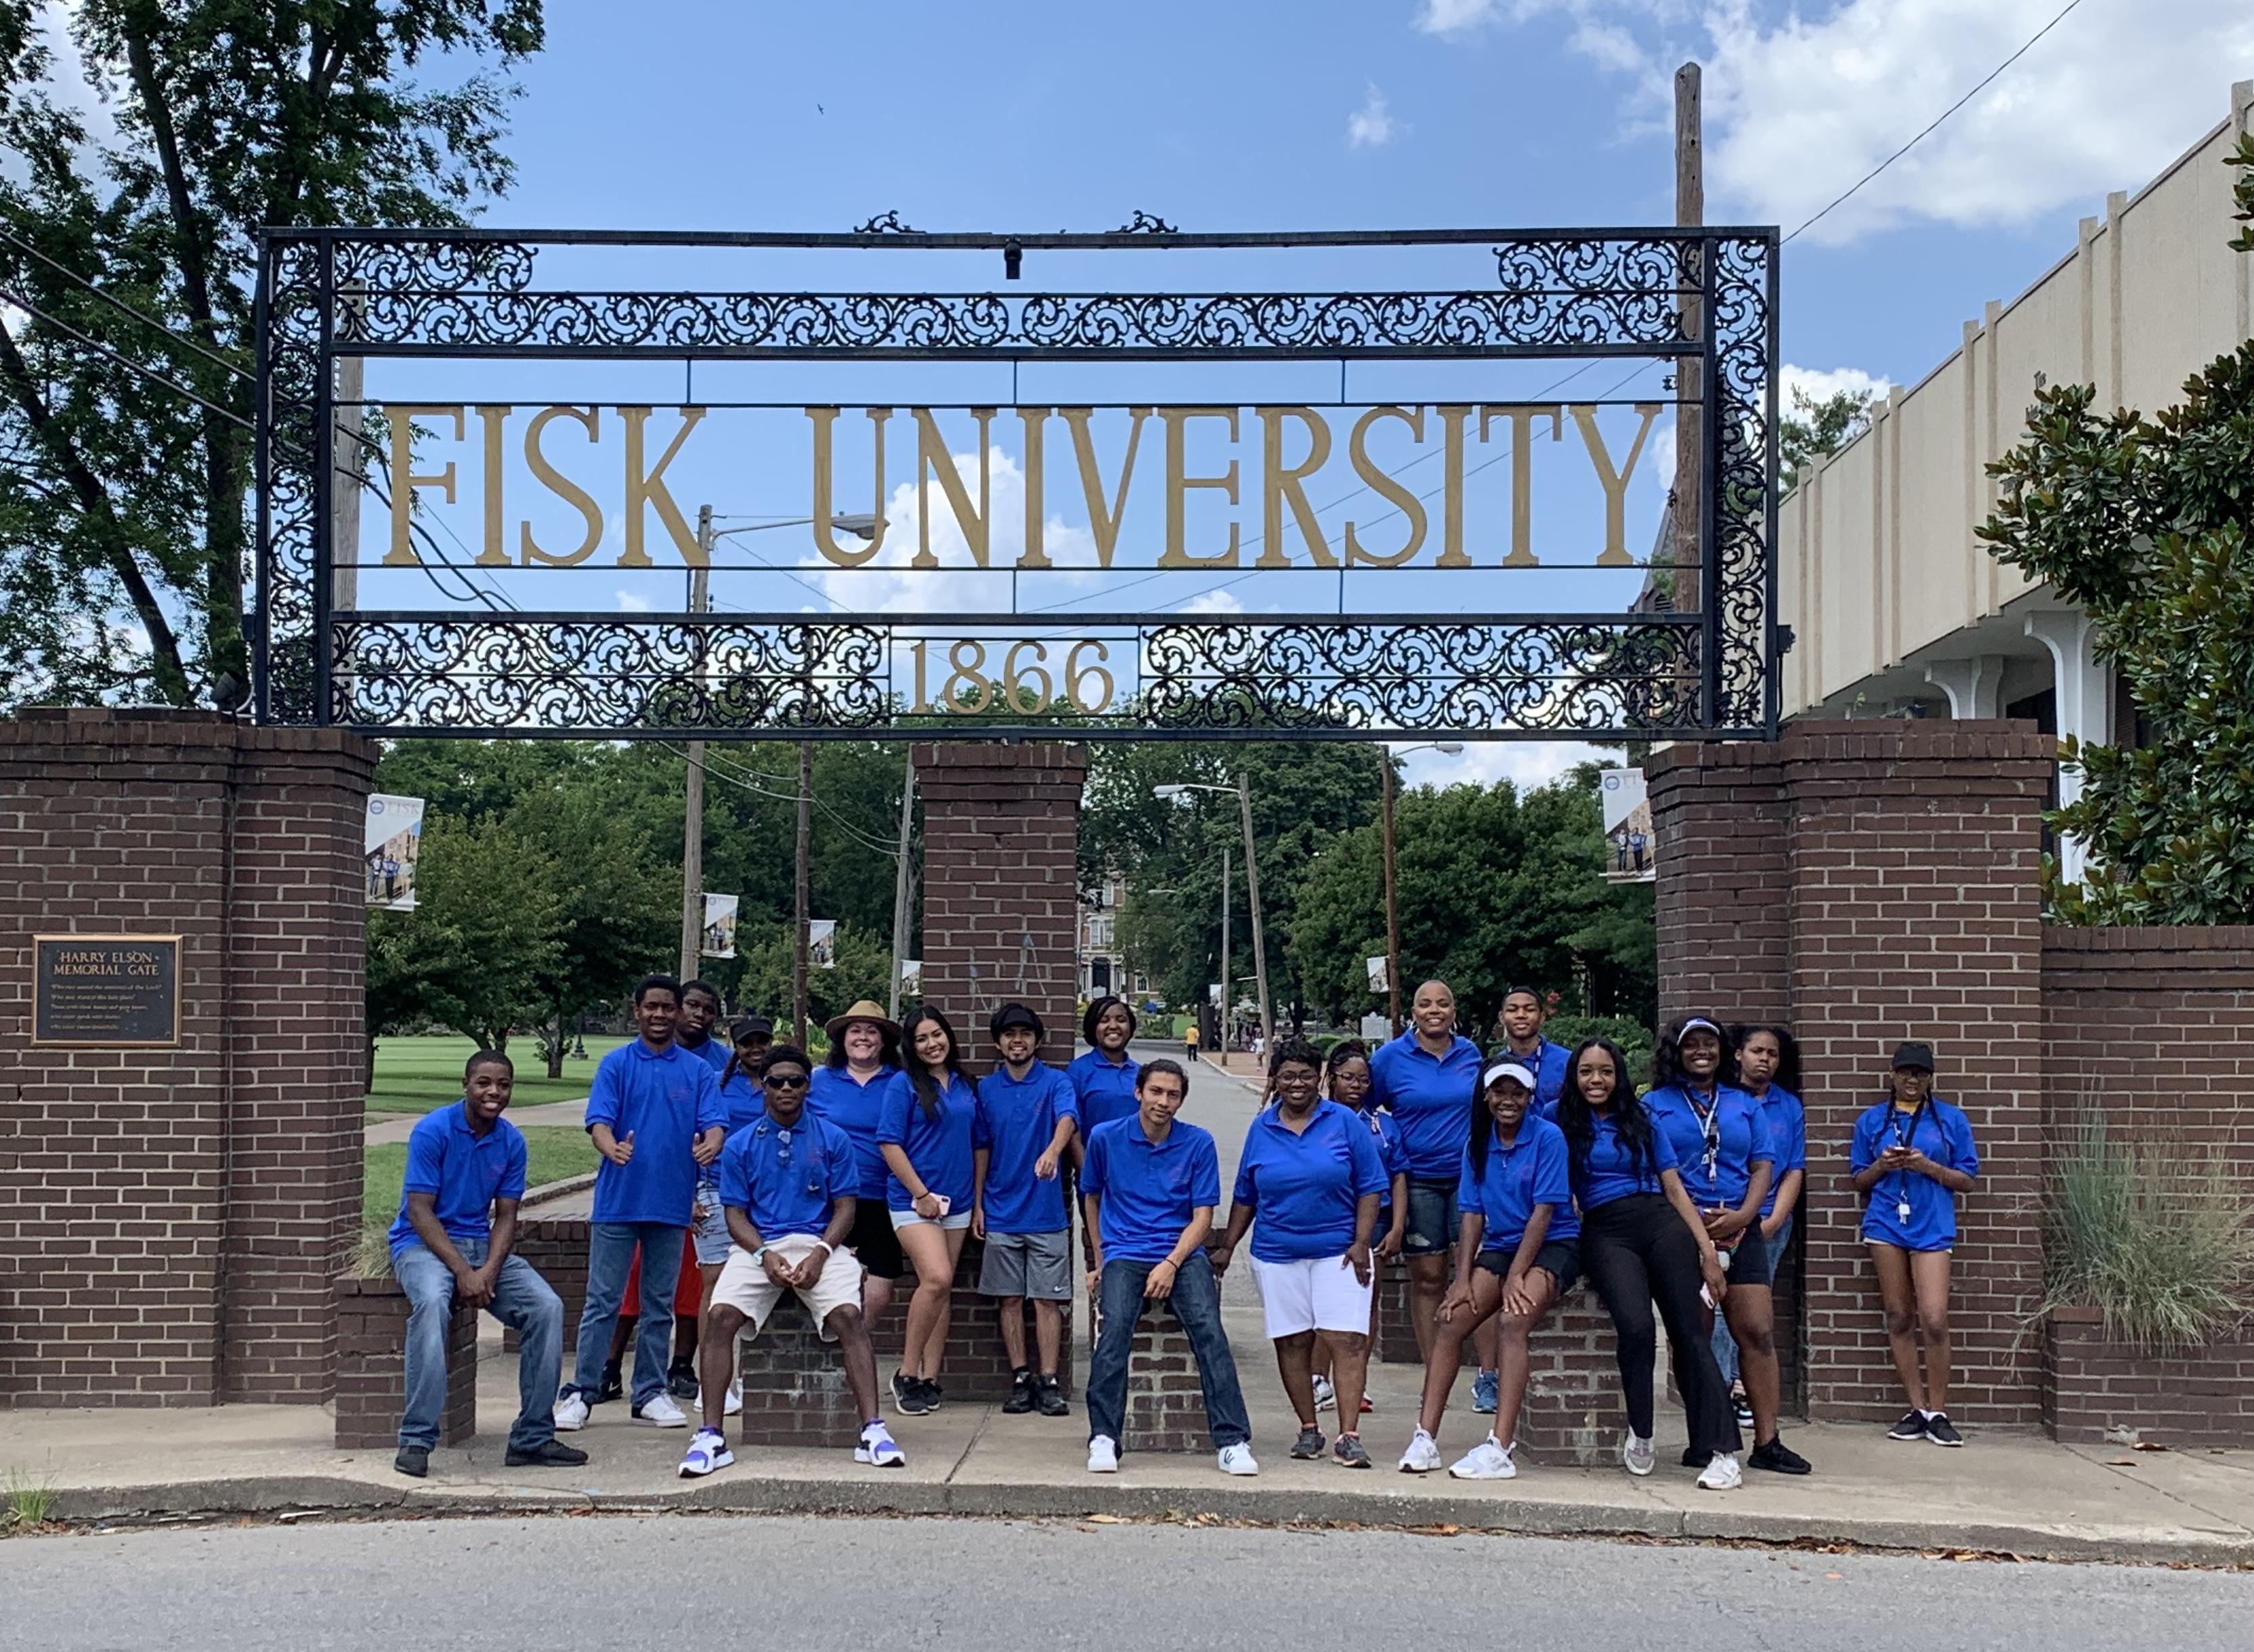 Students in front of Fisk University